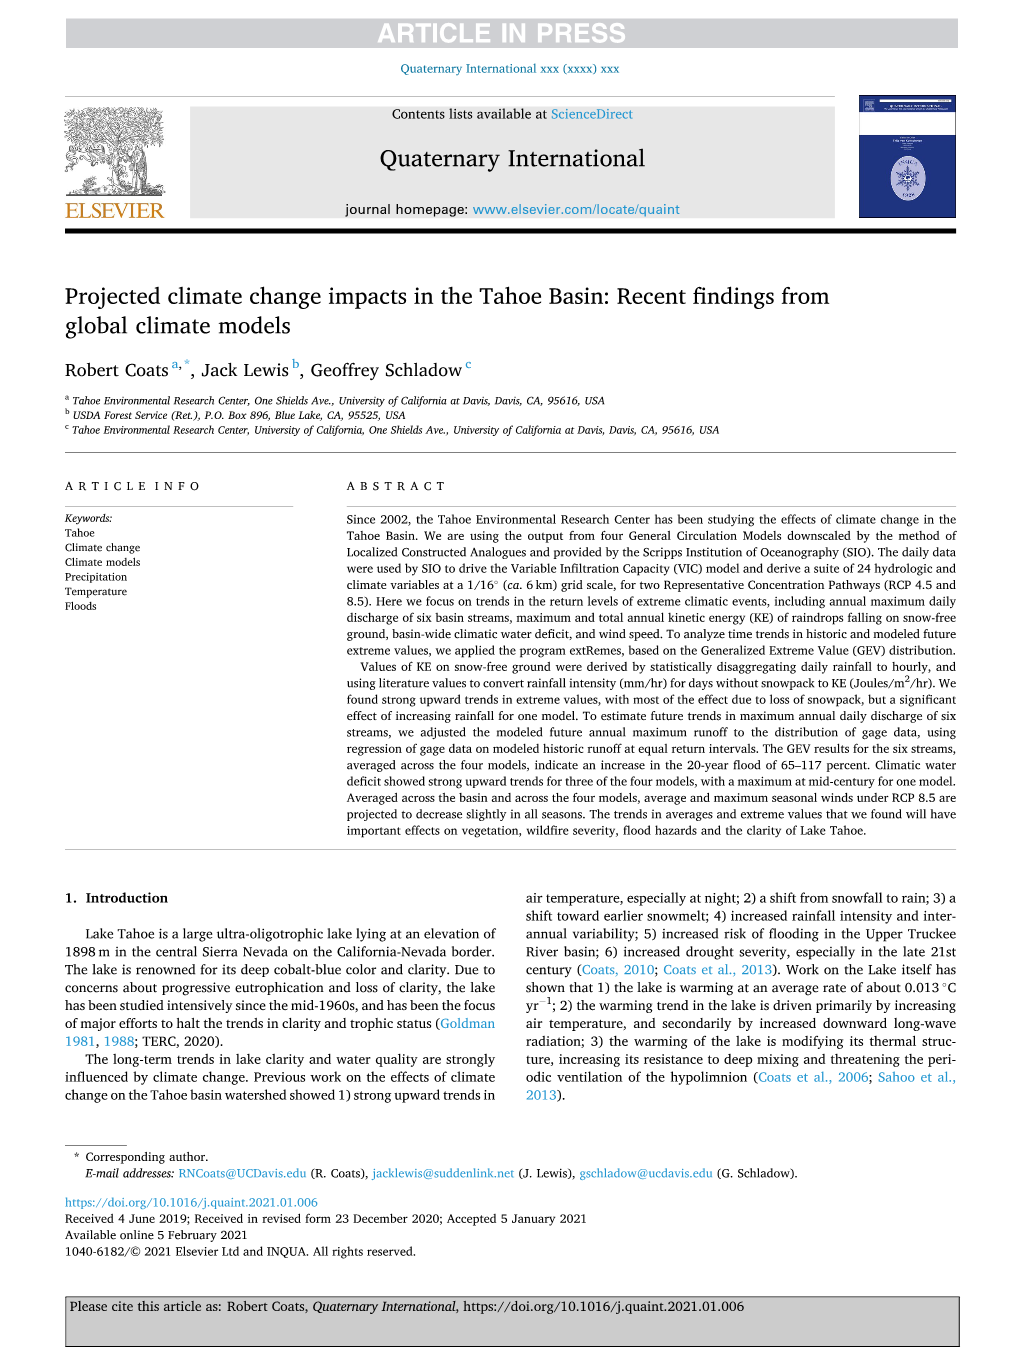 Projected Climate Change Impacts in the Tahoe Basin: Recent Findingsfrom Global Climate Models